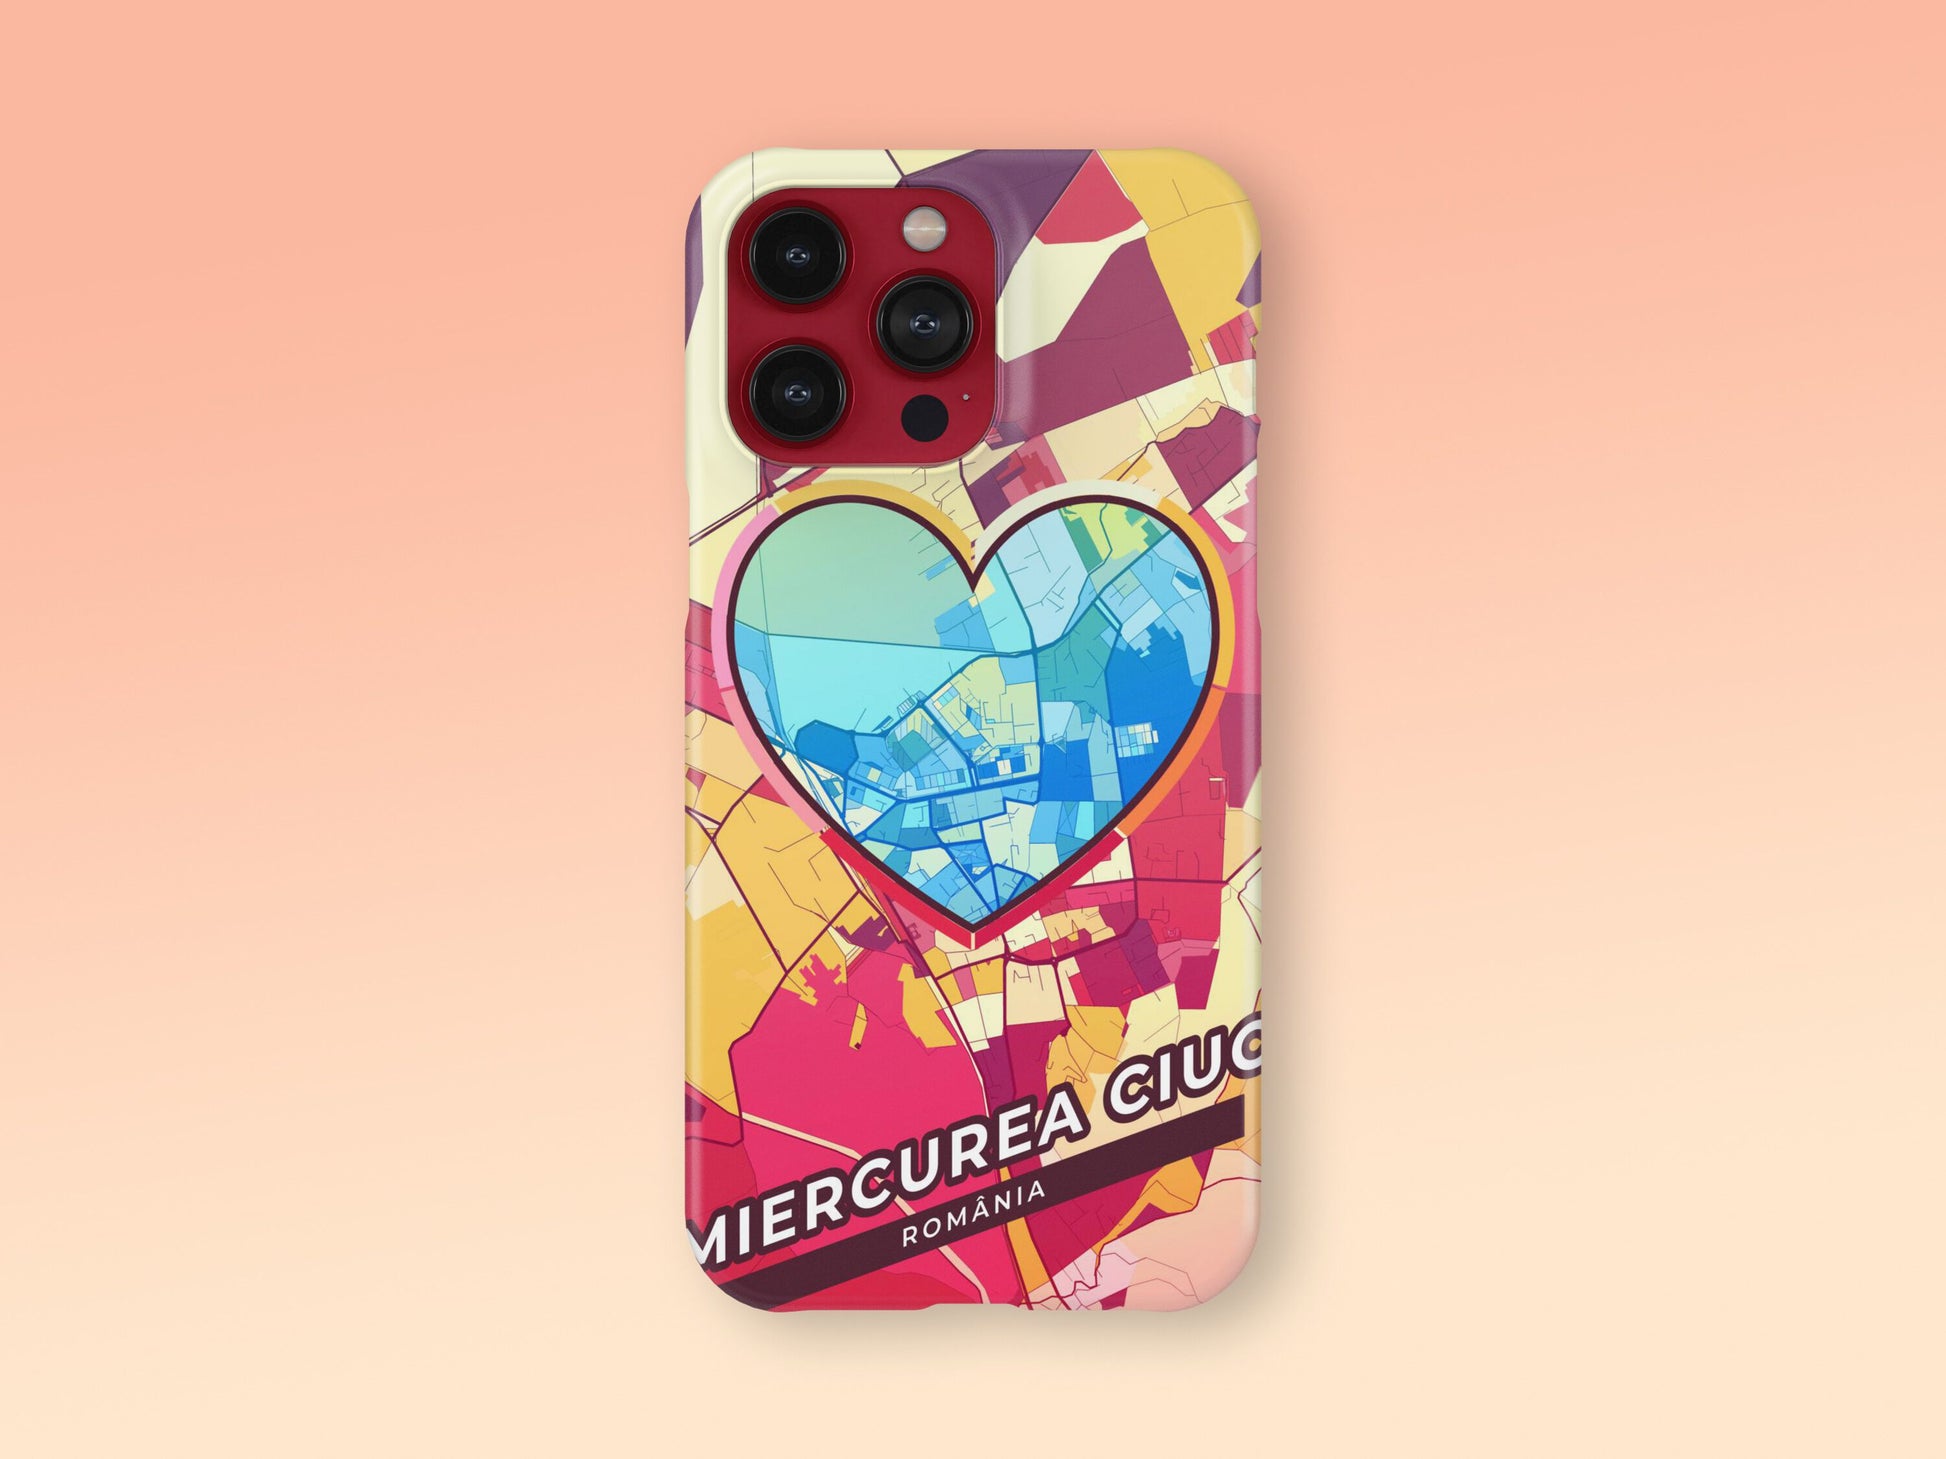 Miercurea Ciuc Romania slim phone case with colorful icon. Birthday, wedding or housewarming gift. Couple match cases. 2